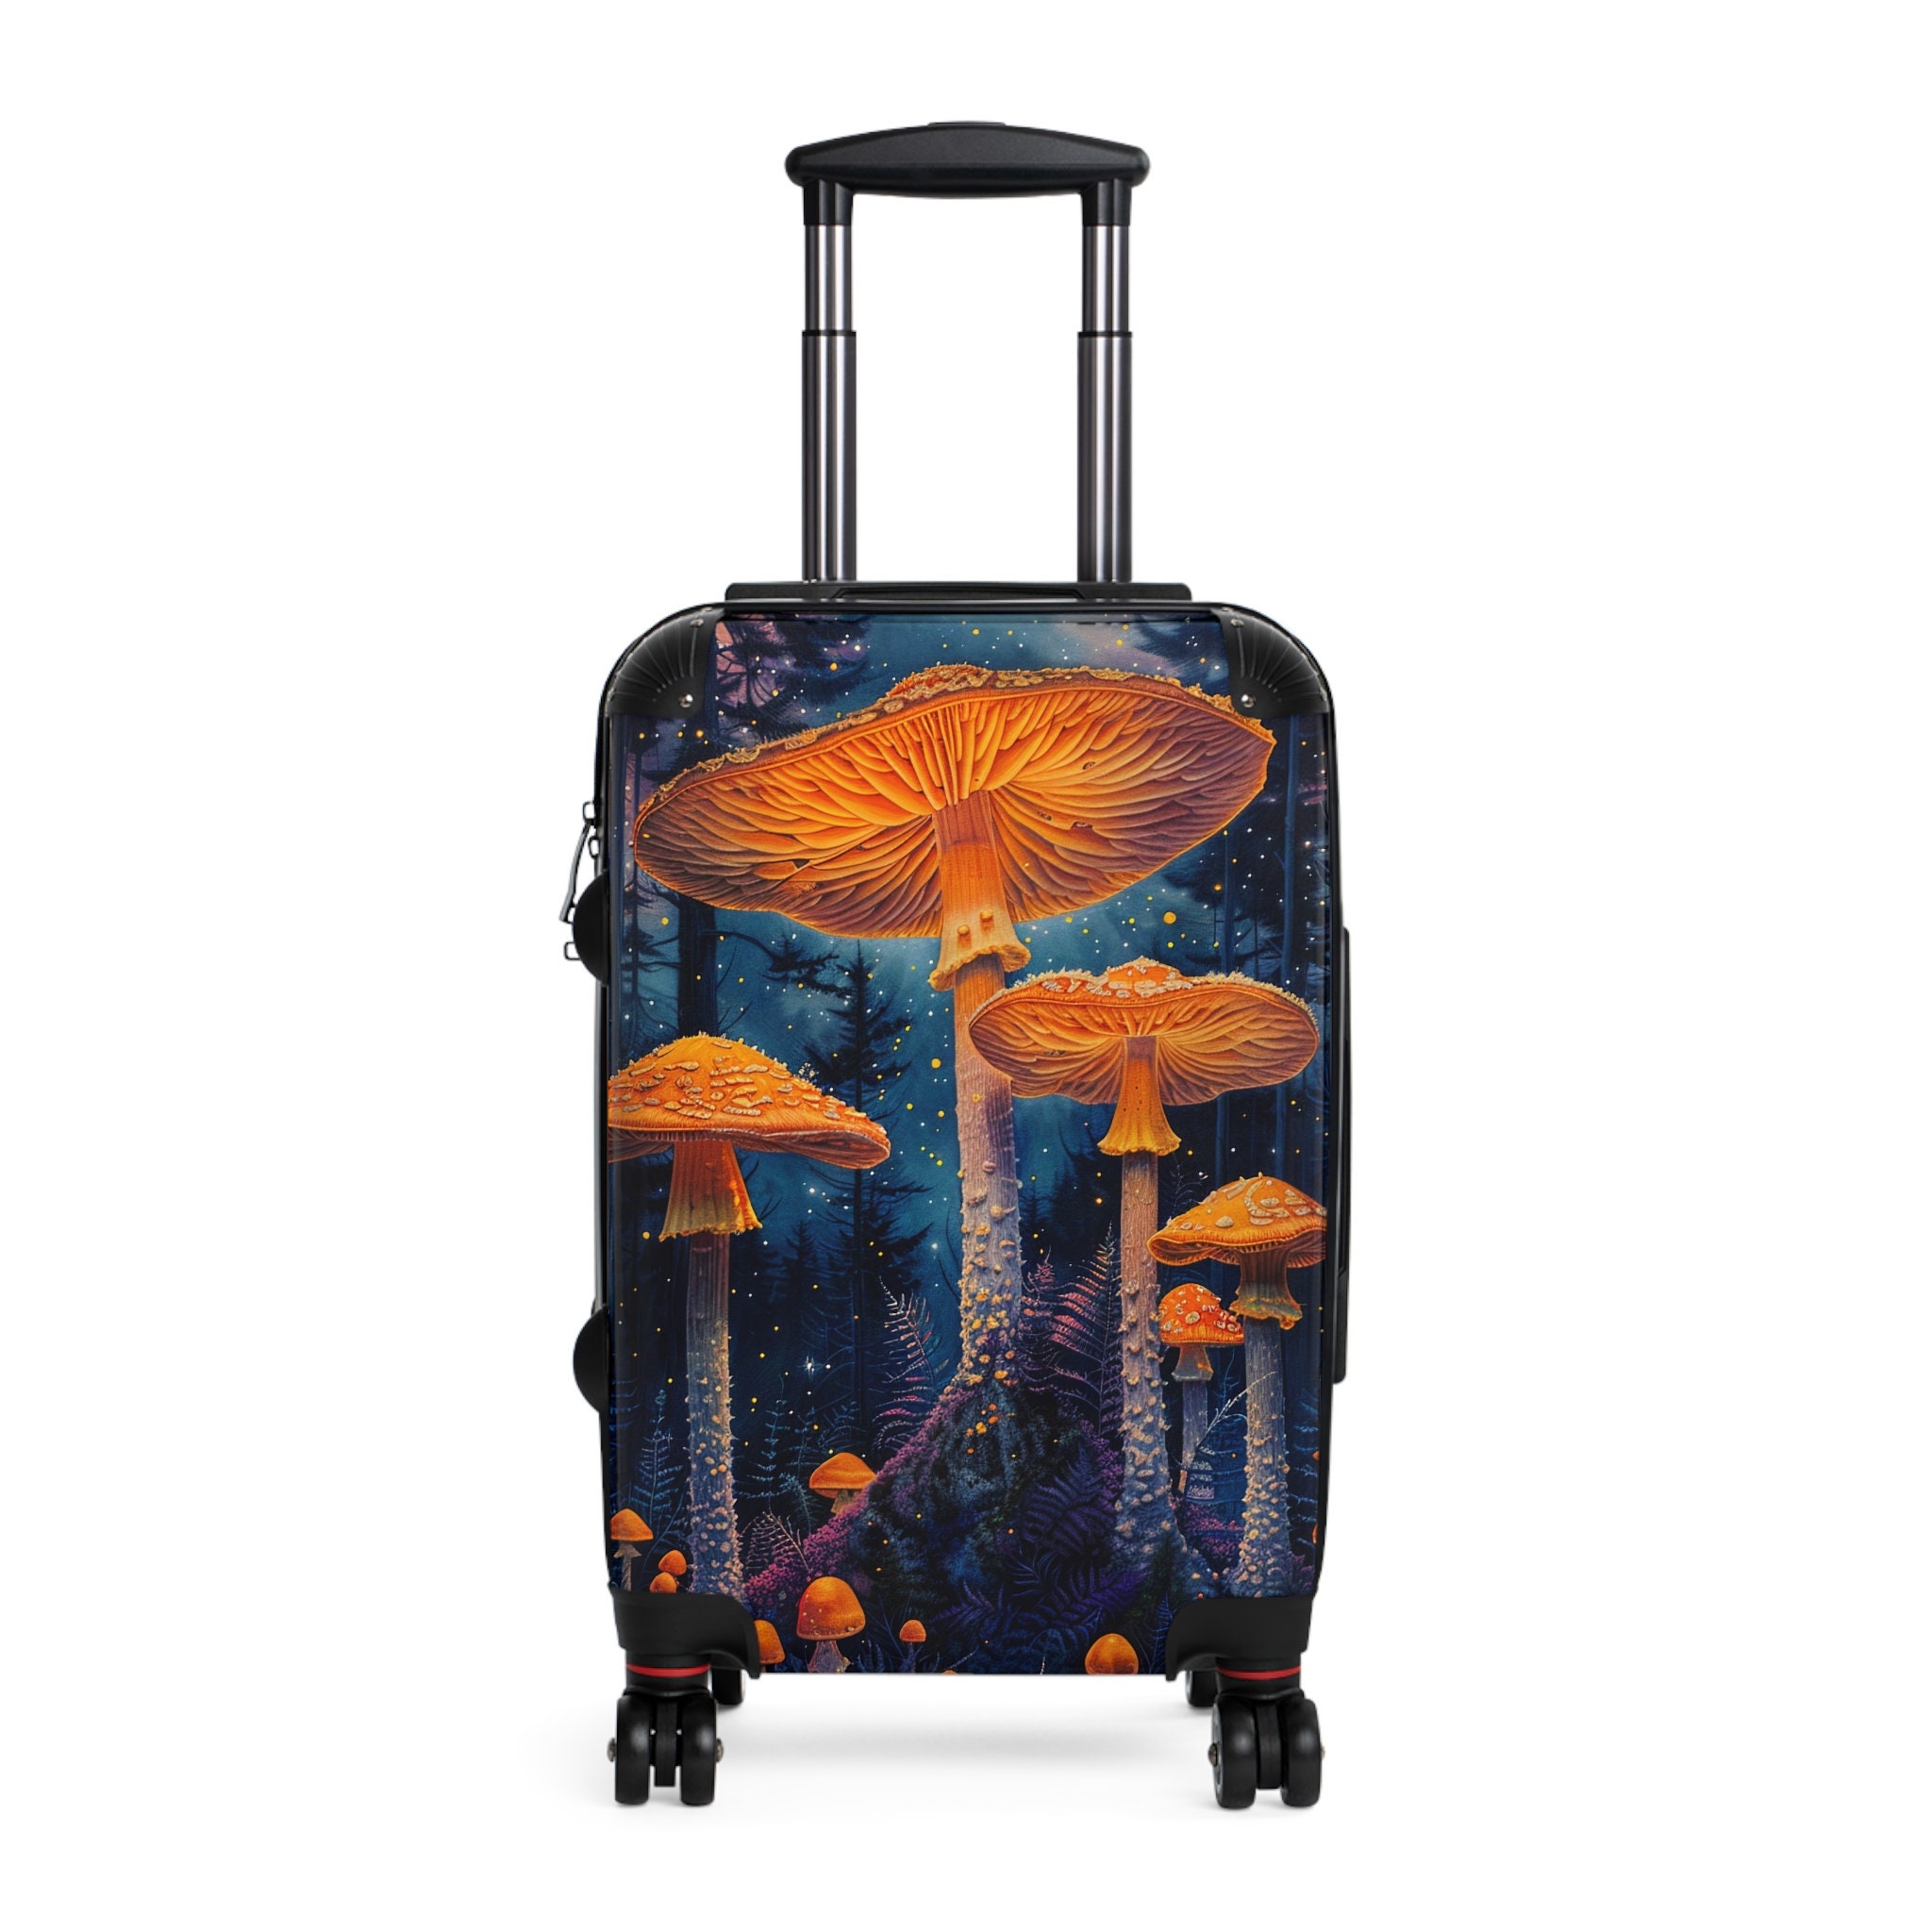 Psychedelic Mushroom Forest Suitcase